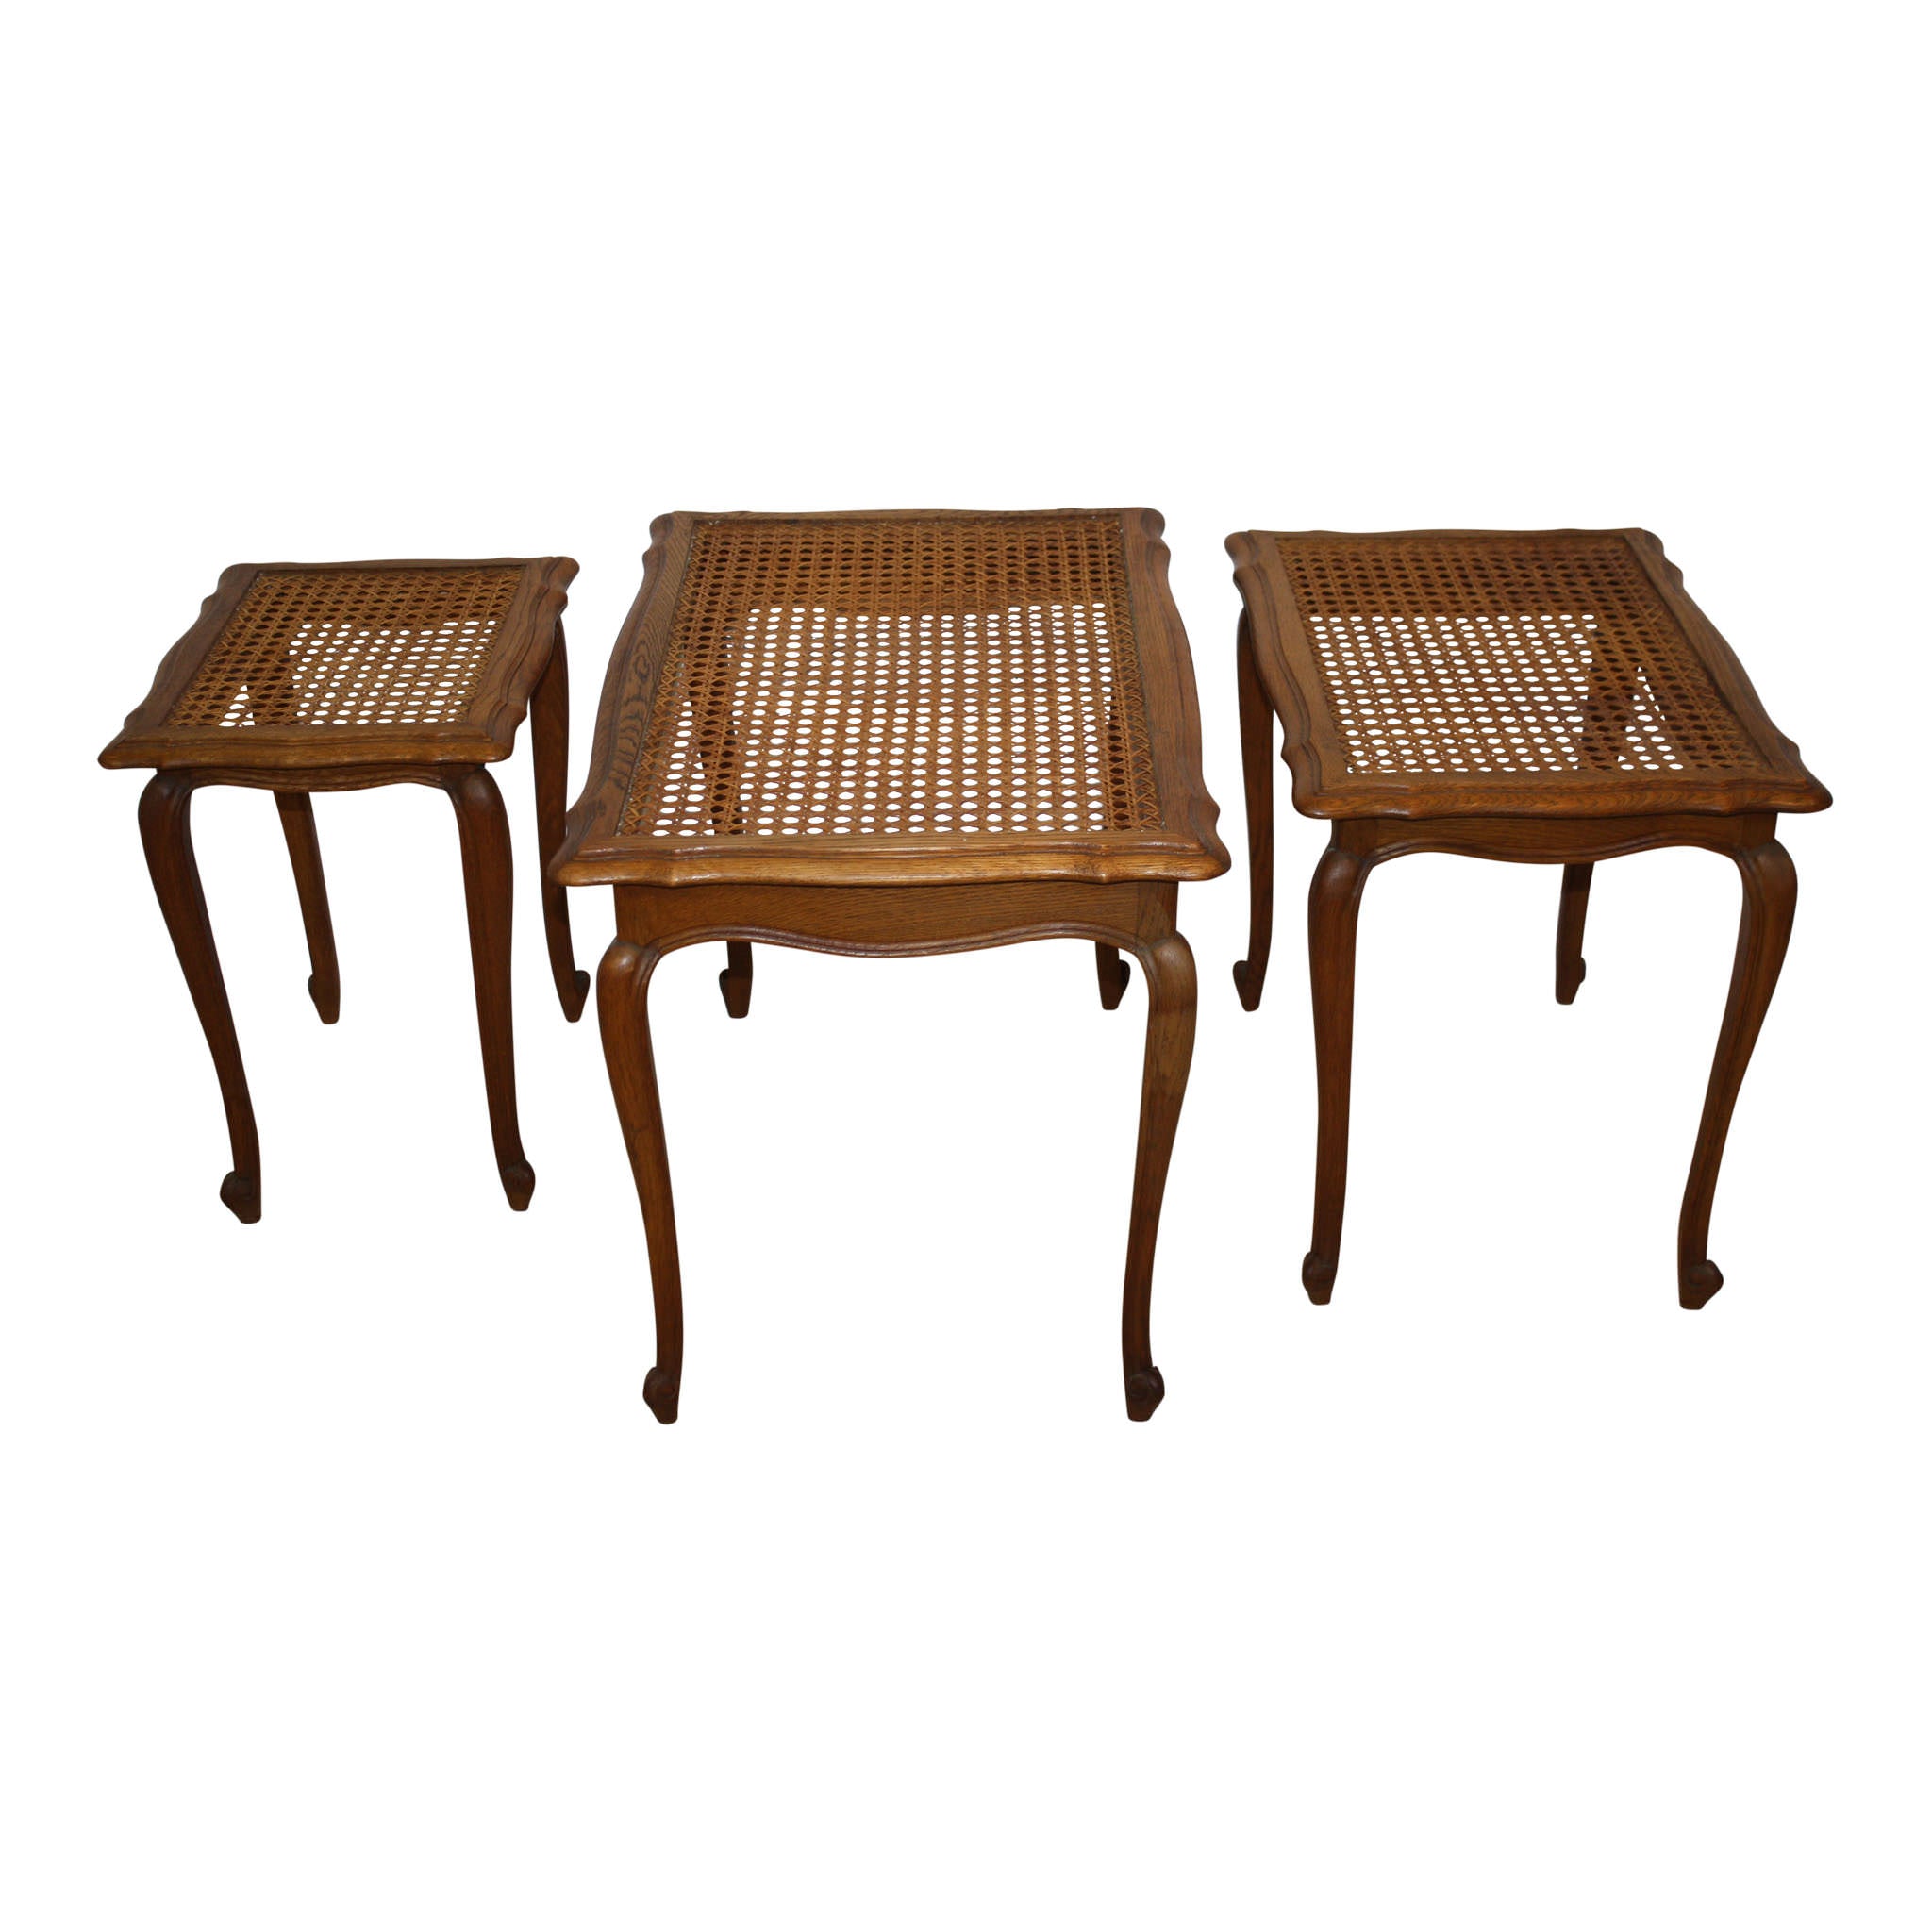 French Oak Nesting Tables with Cane and Glass Tops, Set of Three